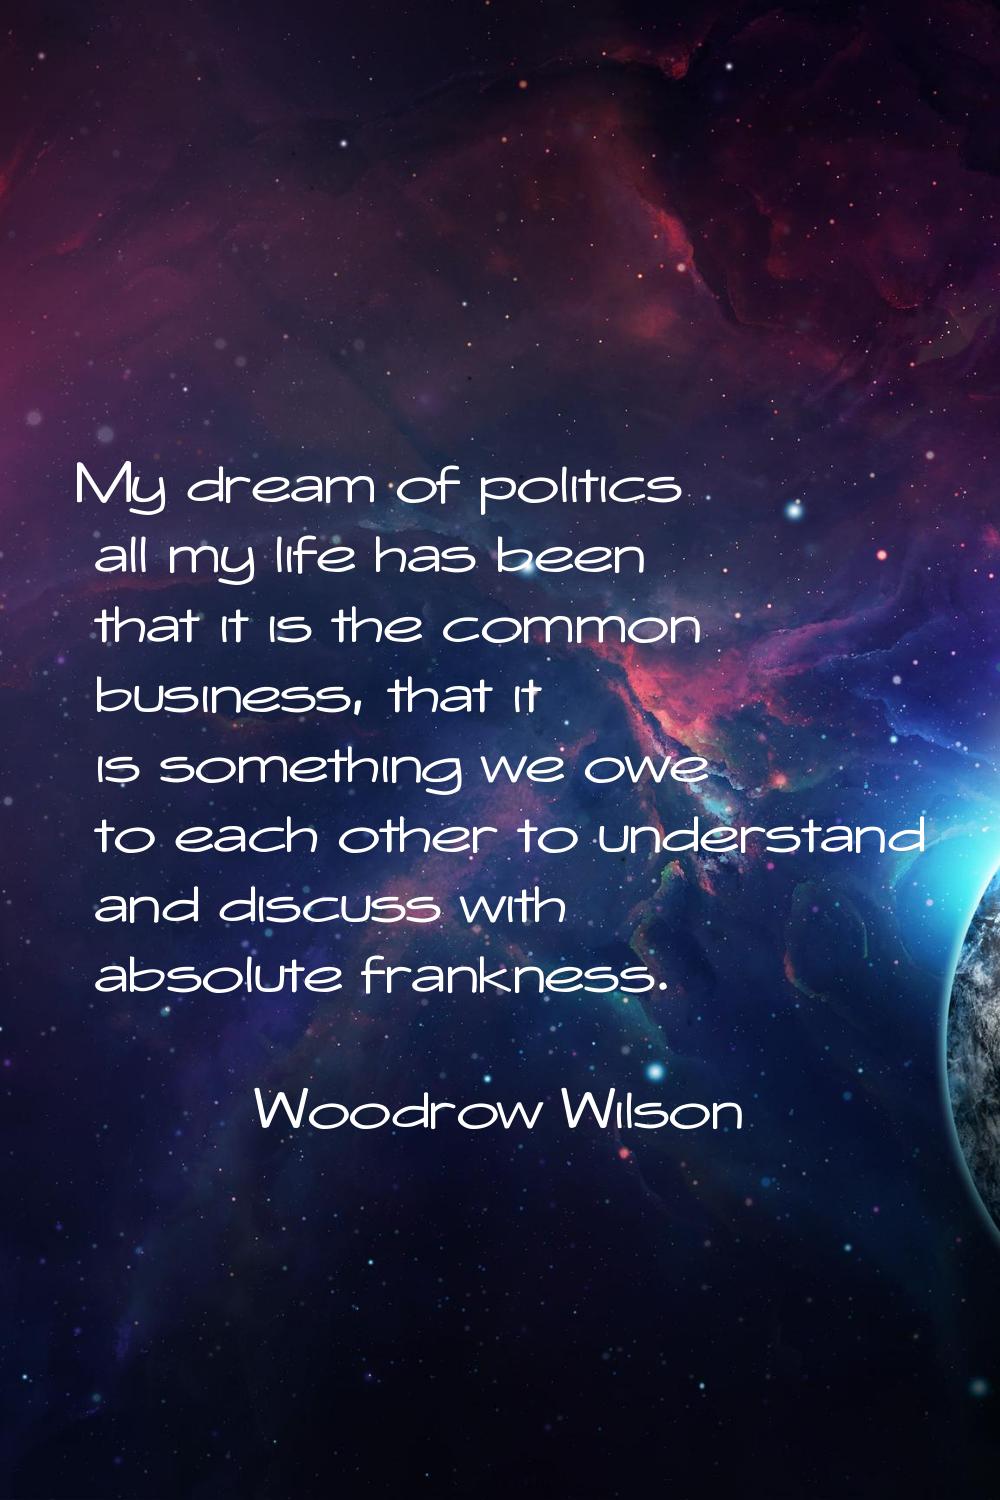 My dream of politics all my life has been that it is the common business, that it is something we o